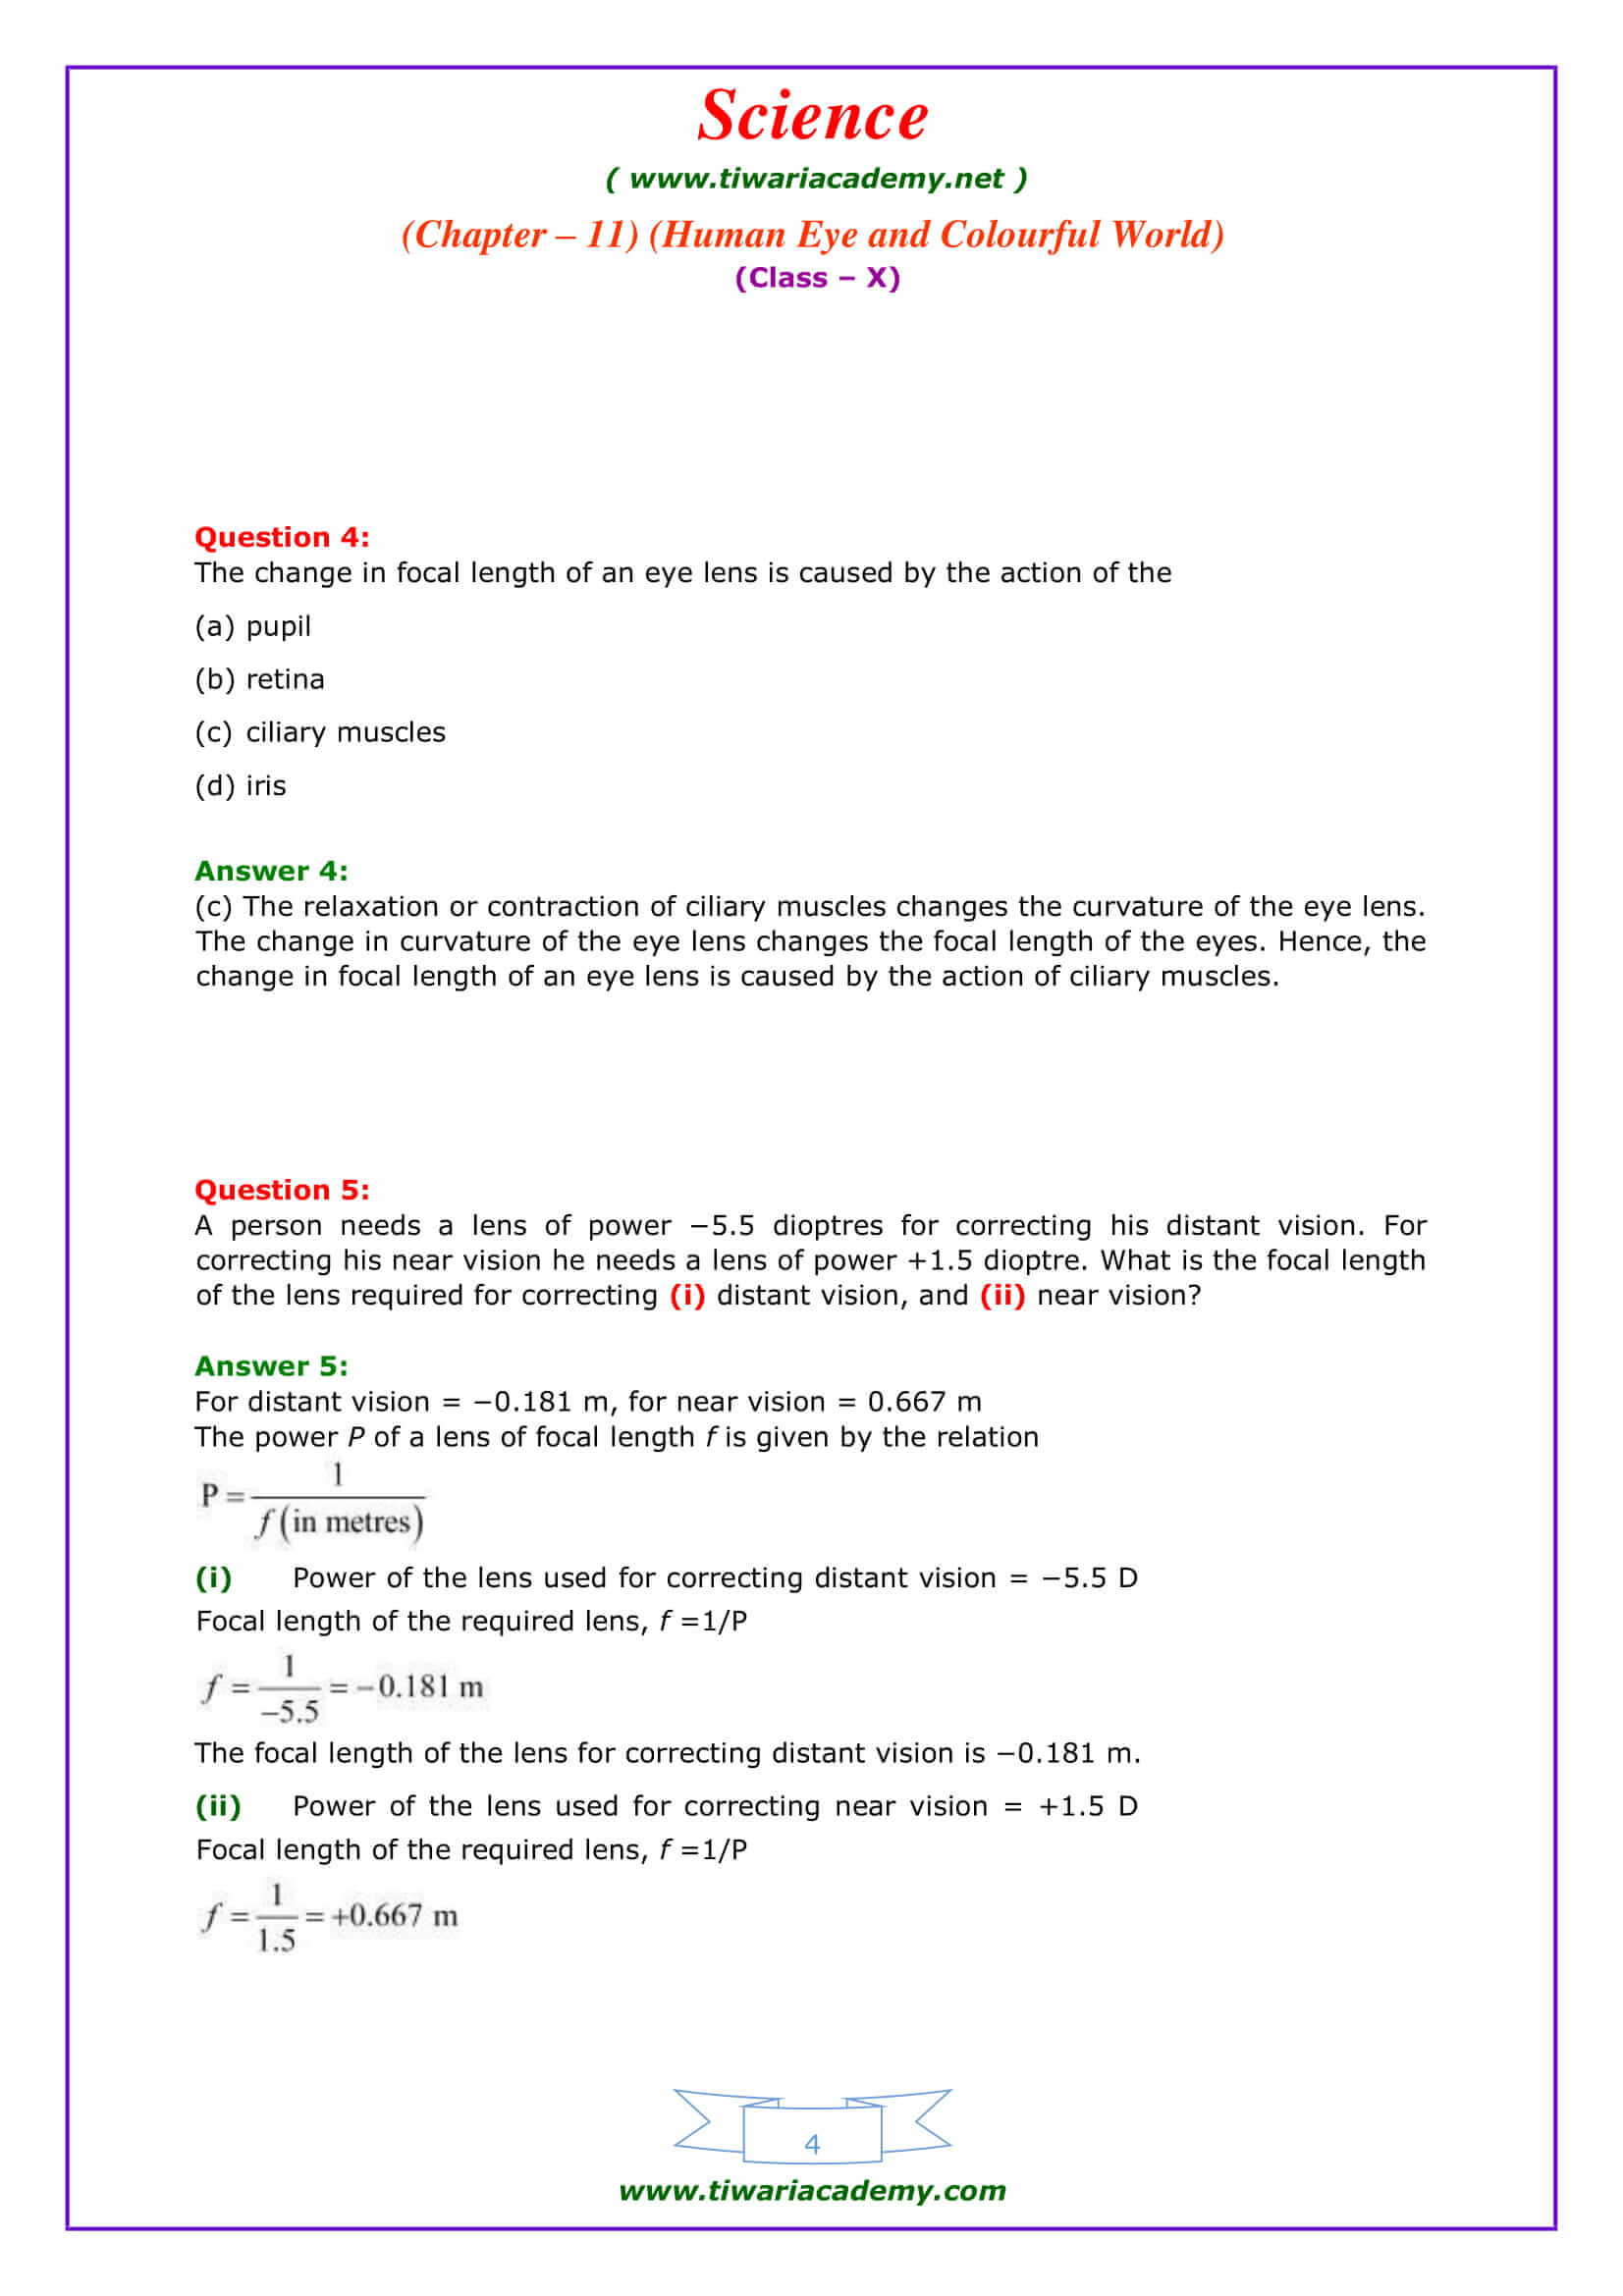 NCERT Solutions for Class 10 Science Chapter 11 Human eye and colorful world Exercises in pdf form free